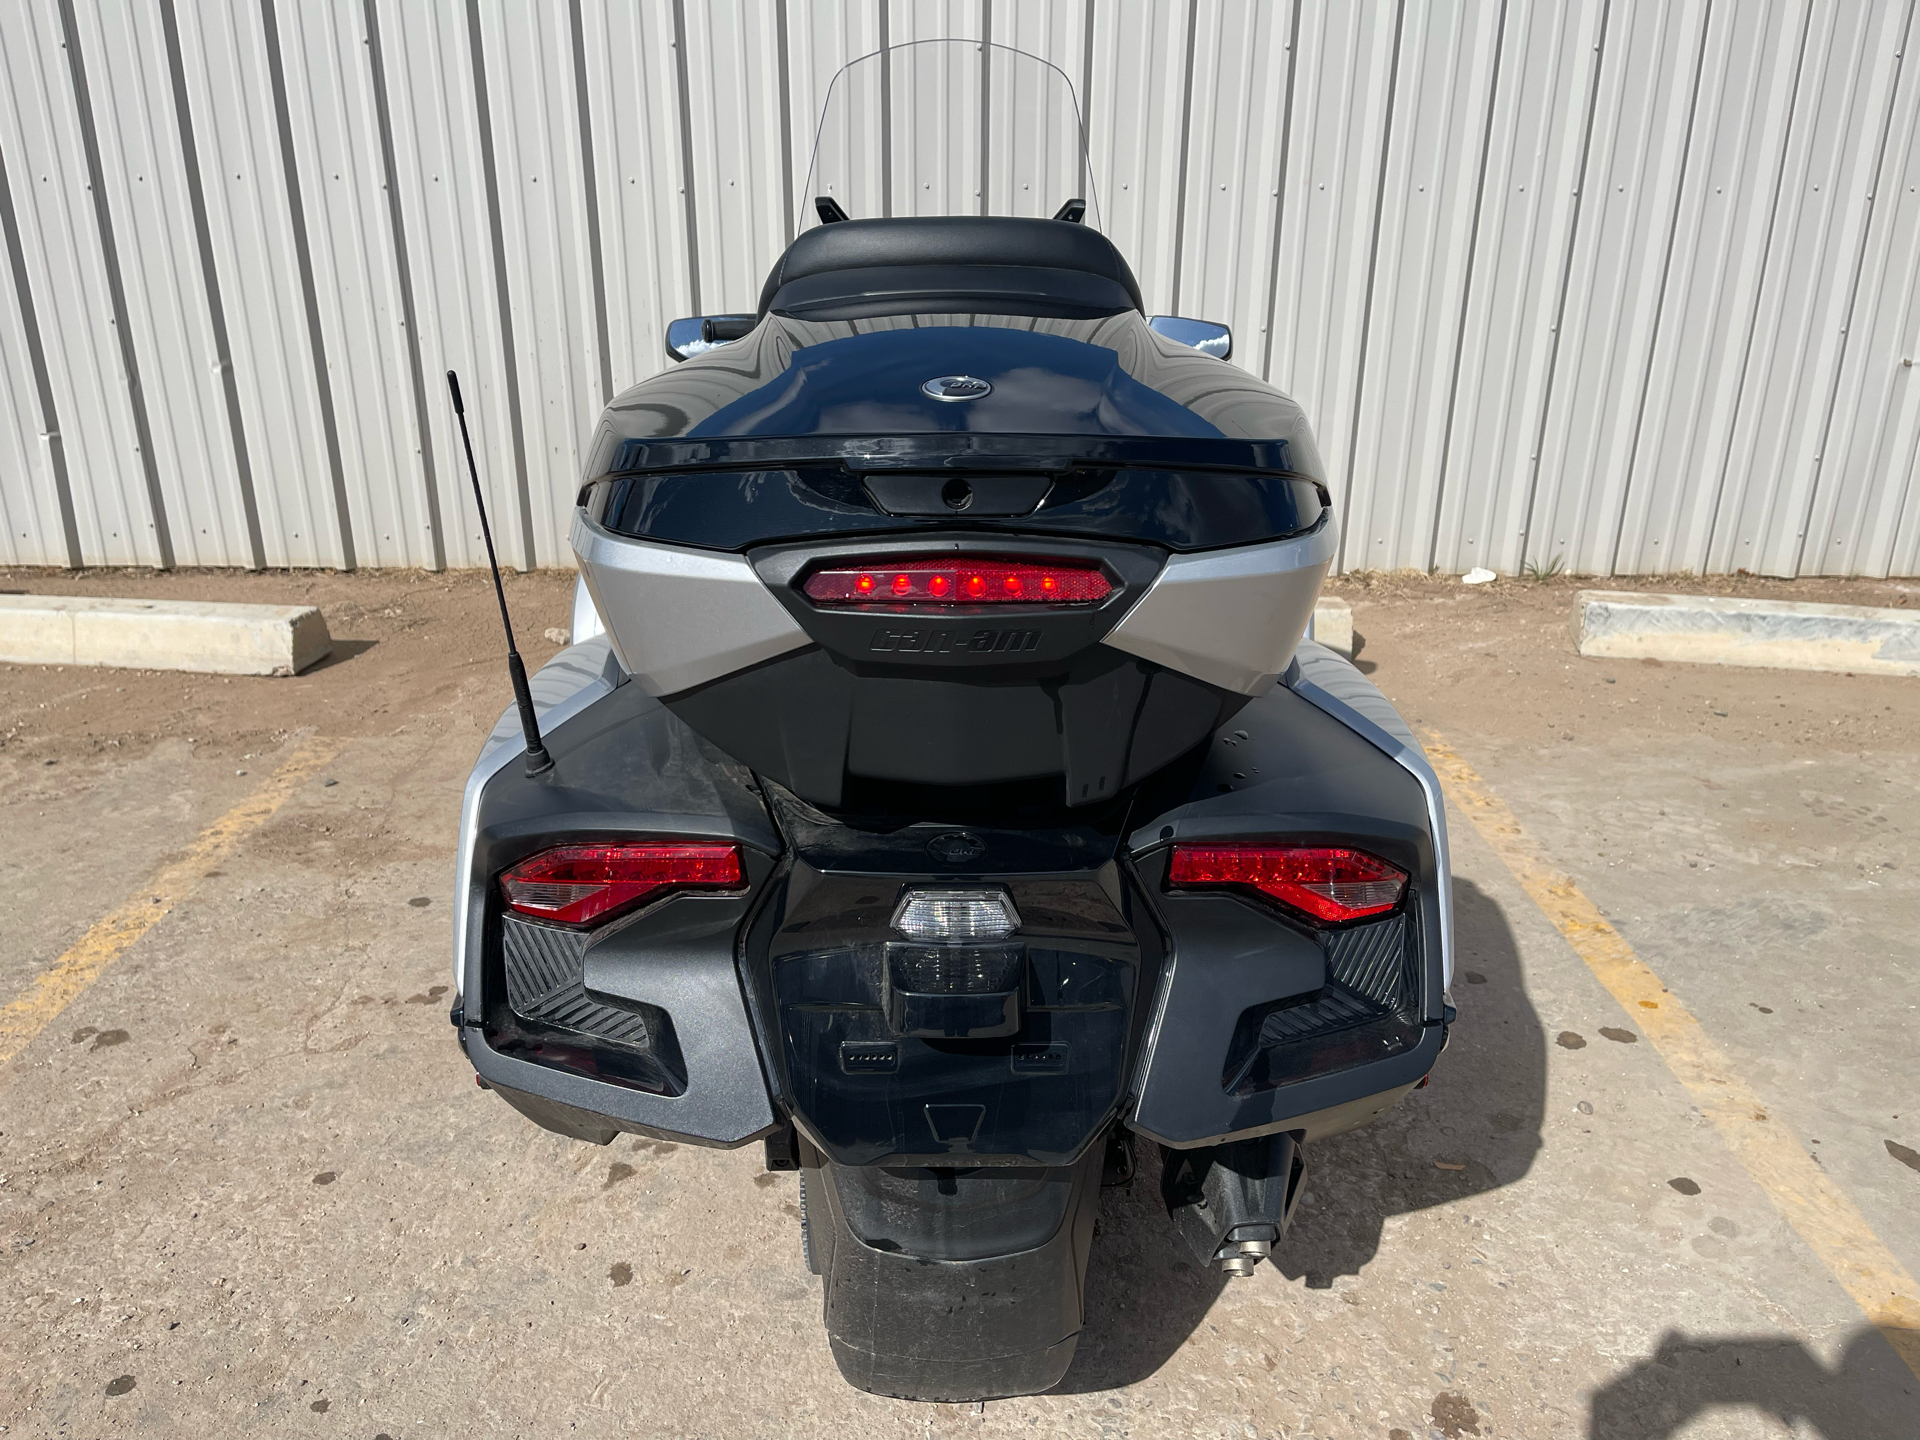 2022 Can-Am Spyder RT Limited in Amarillo, Texas - Photo 4